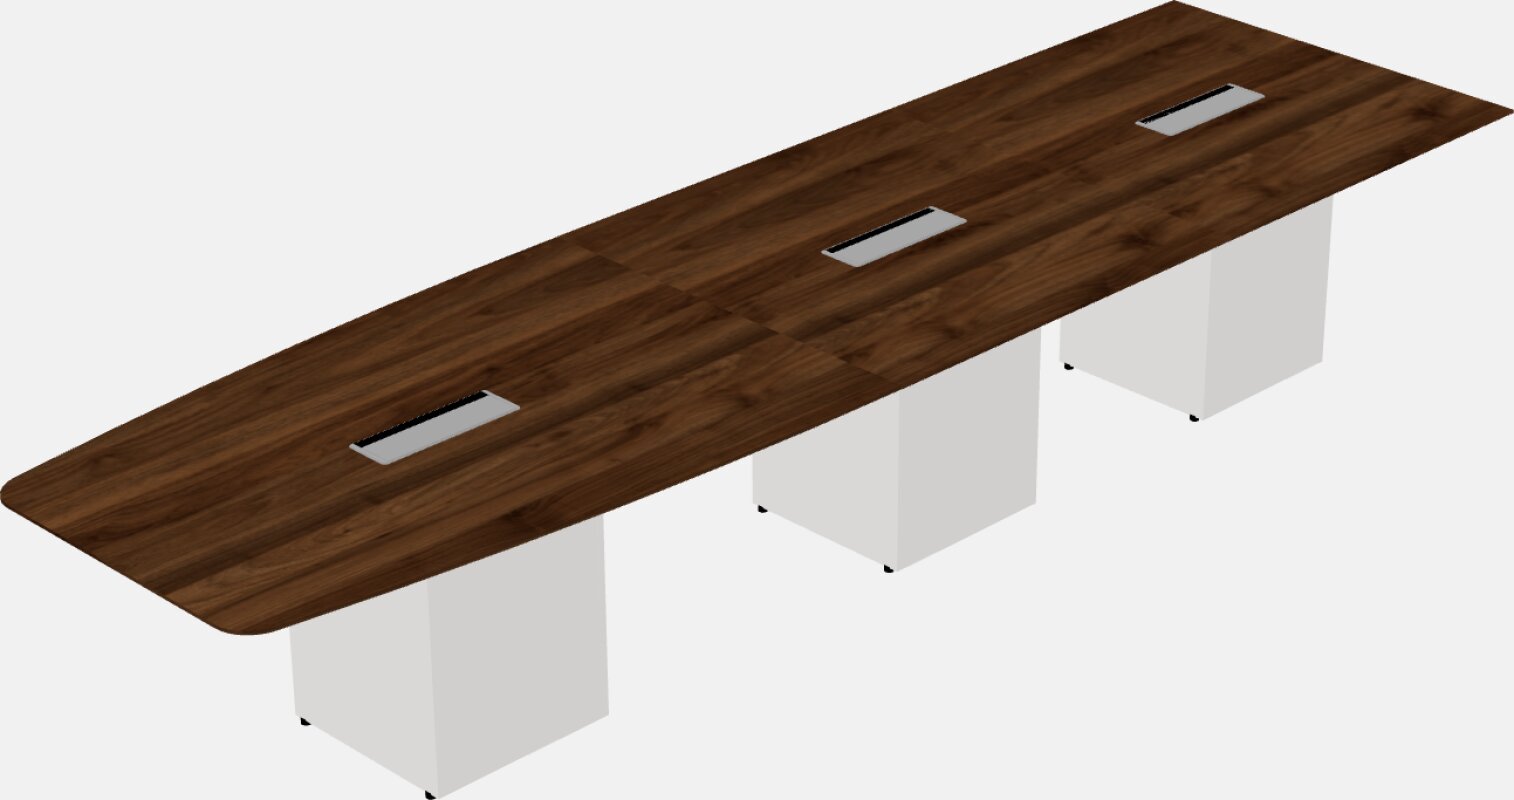 Off-wall meeting table